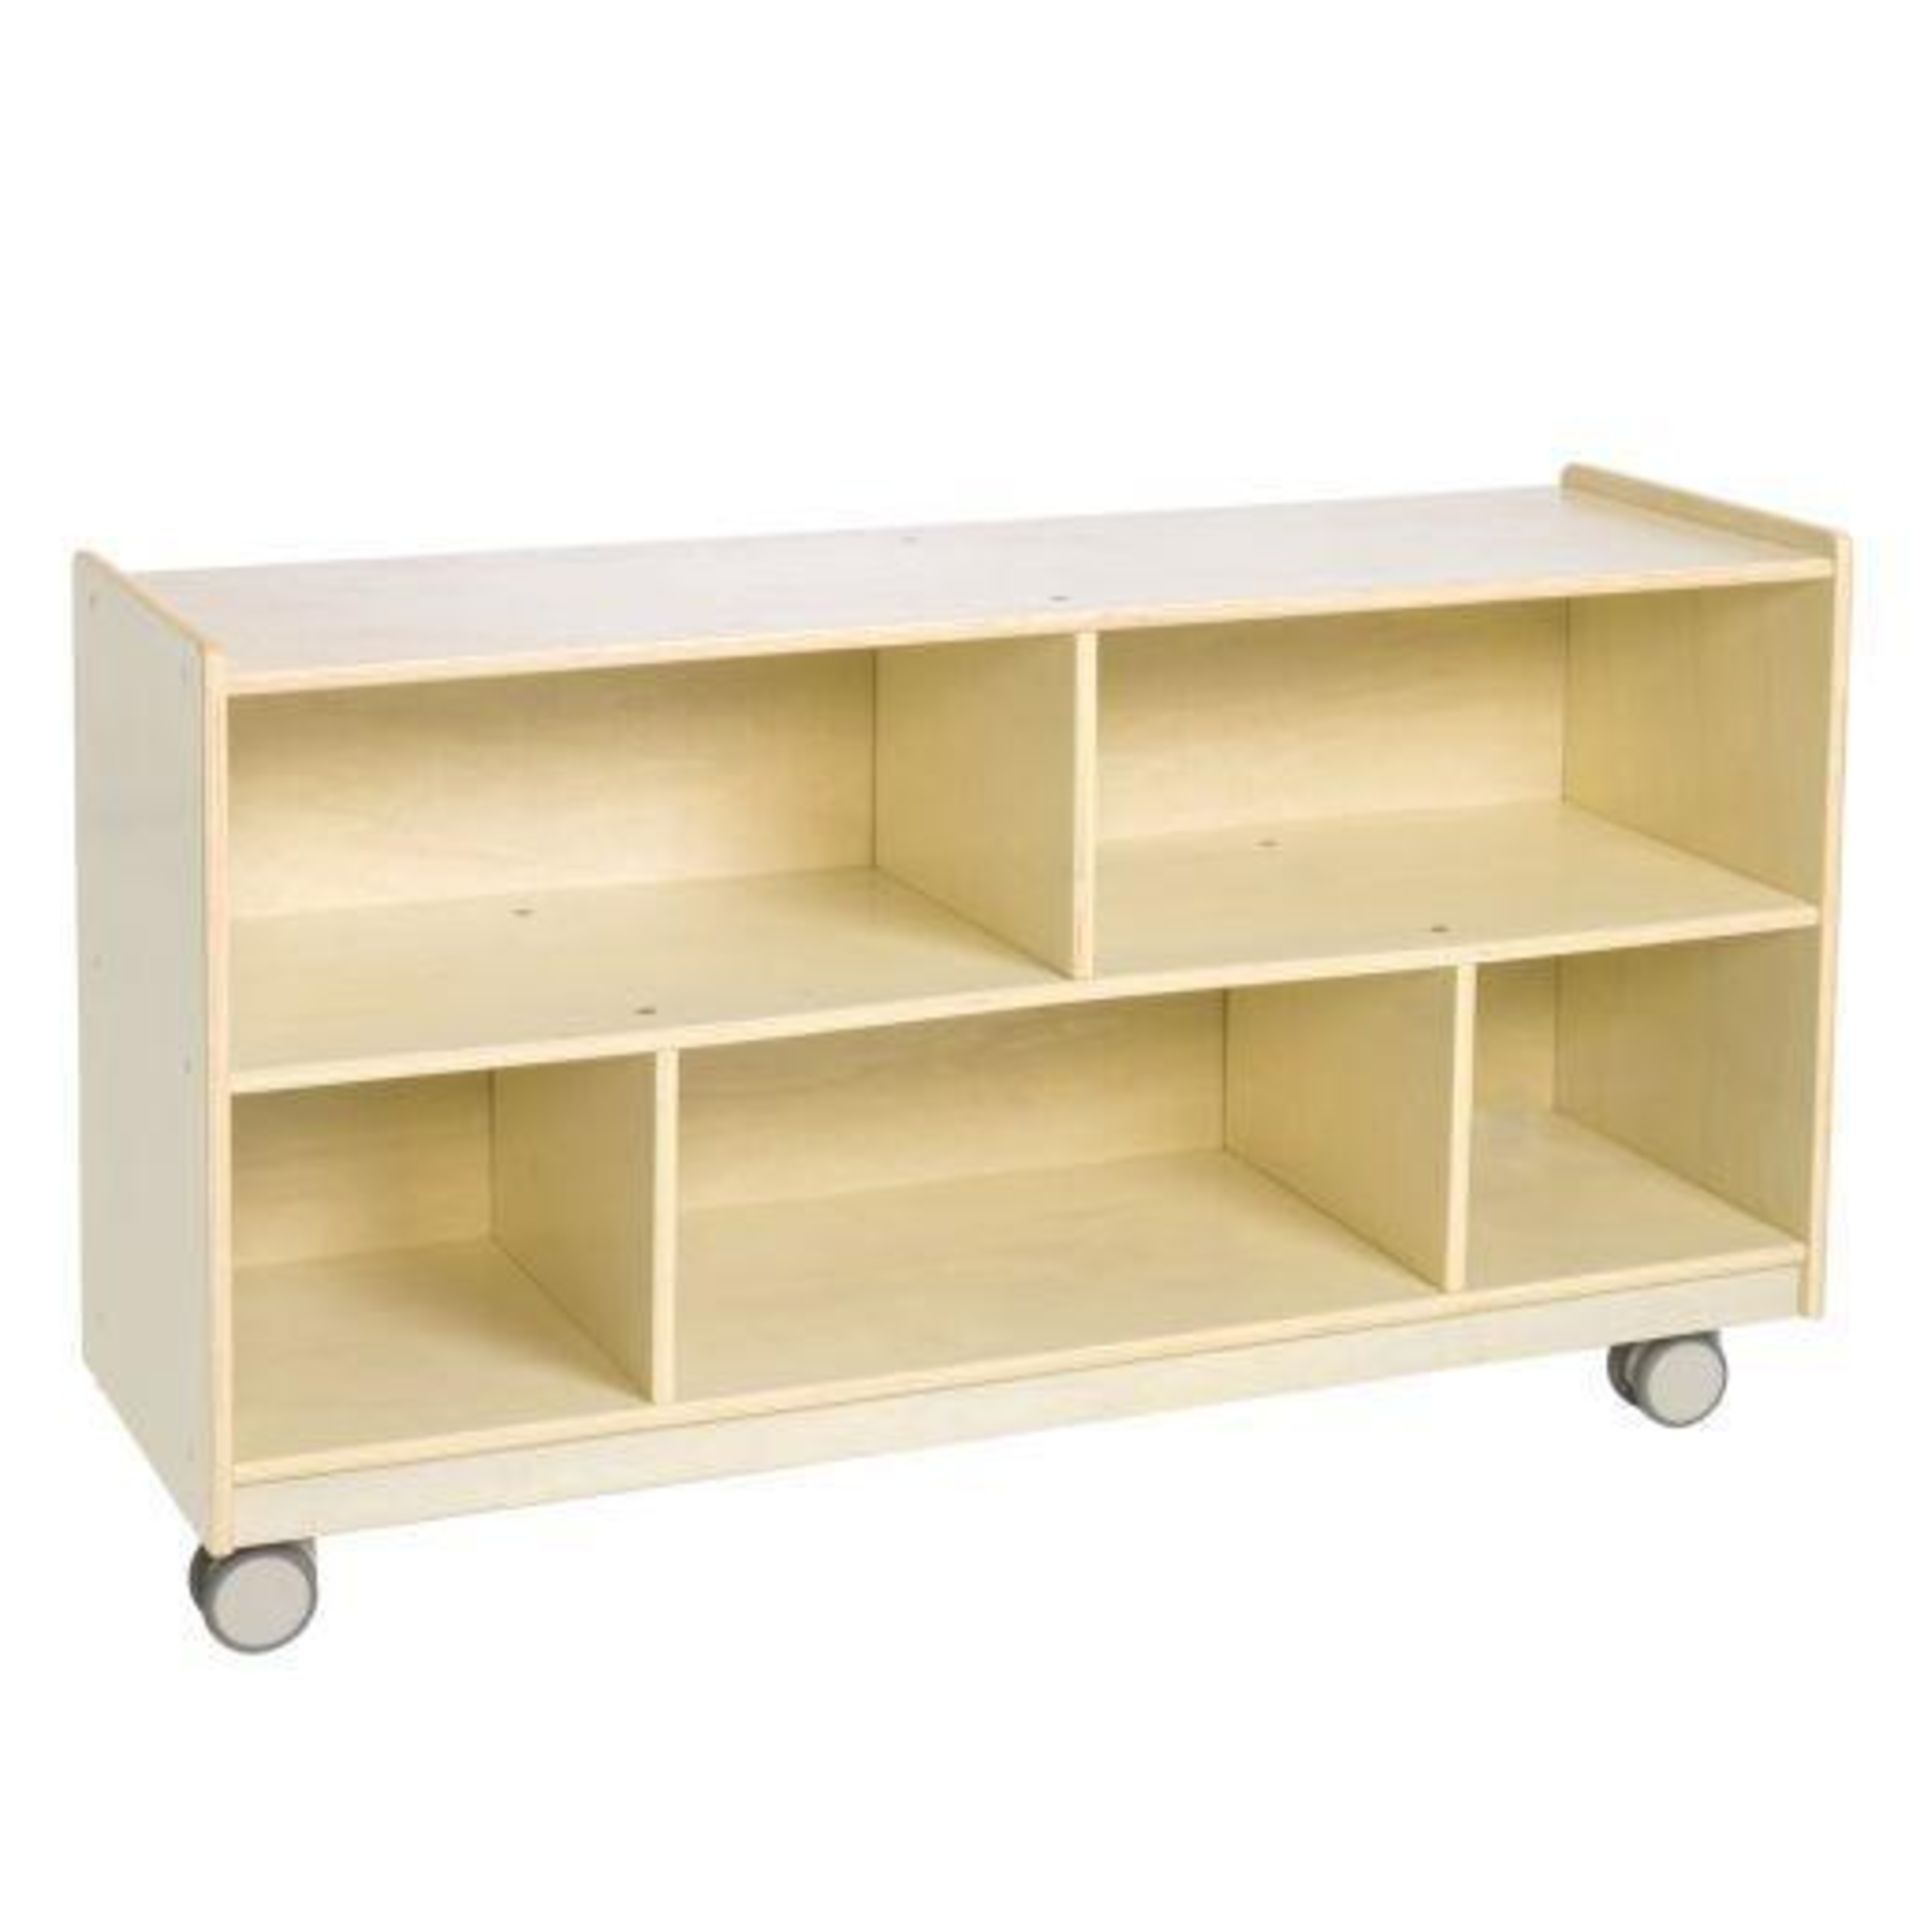 LOT: (9) Children's Factory Single Toddler 2-Shelf Mobile Storage, Similar to Picture but has Caster